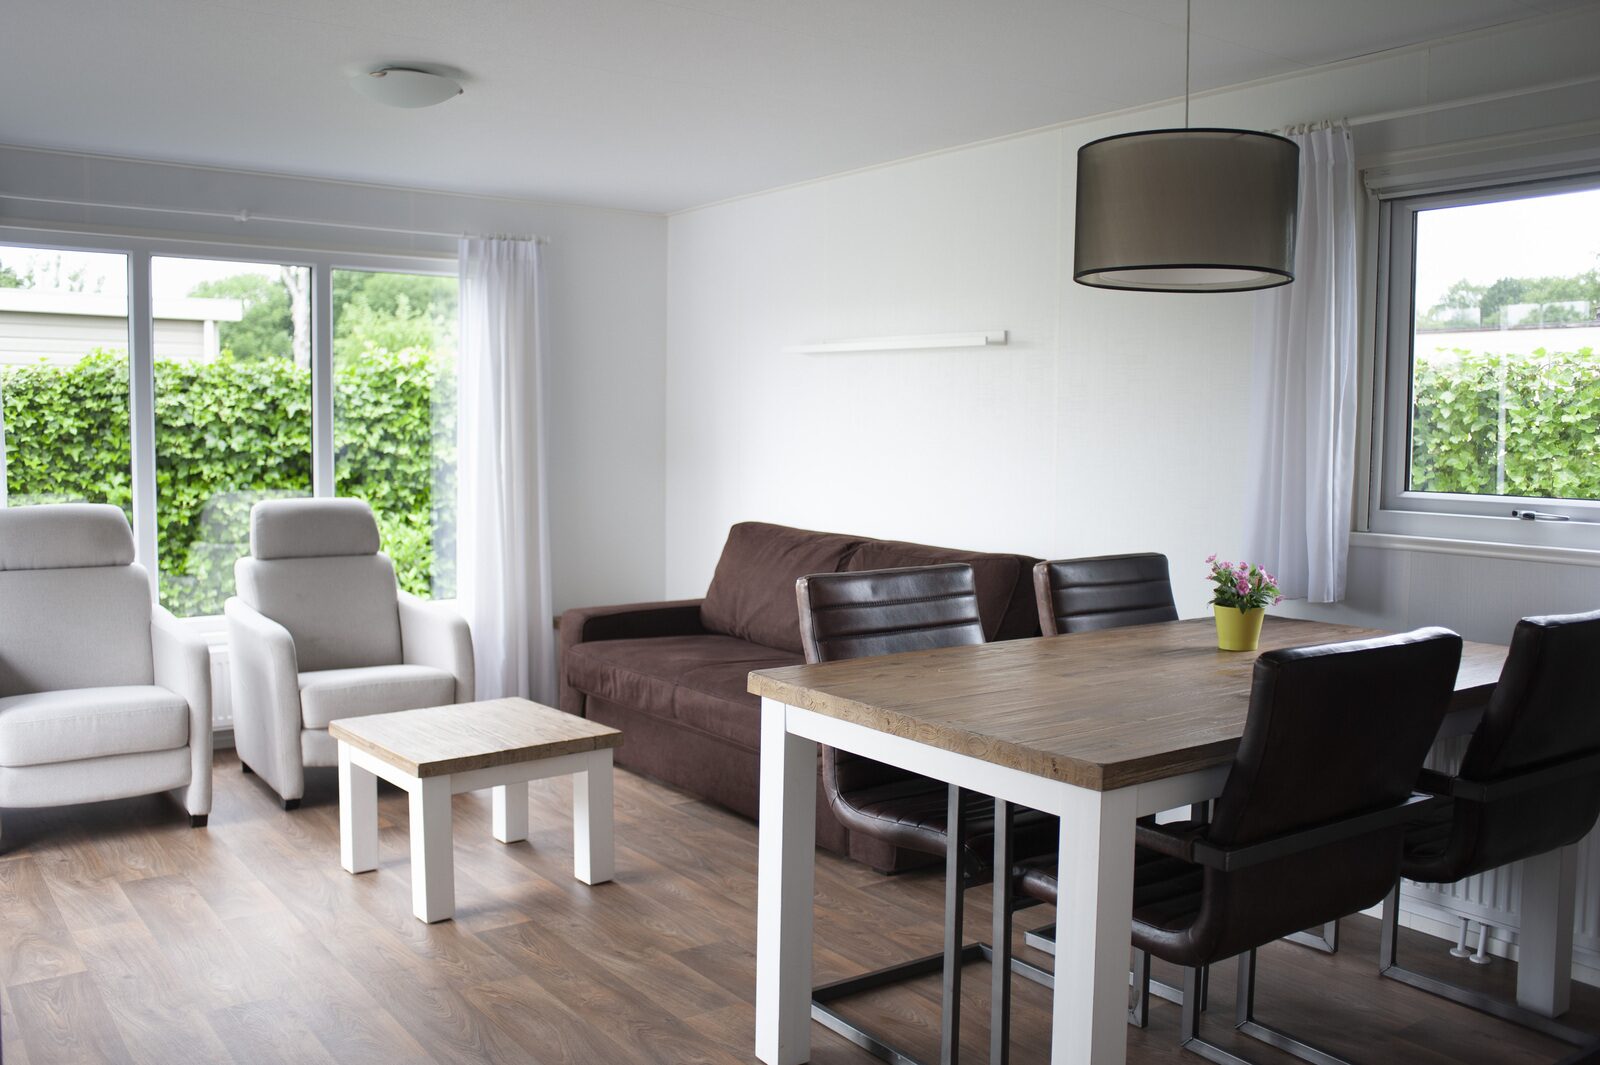 Veluwe lodge for two people